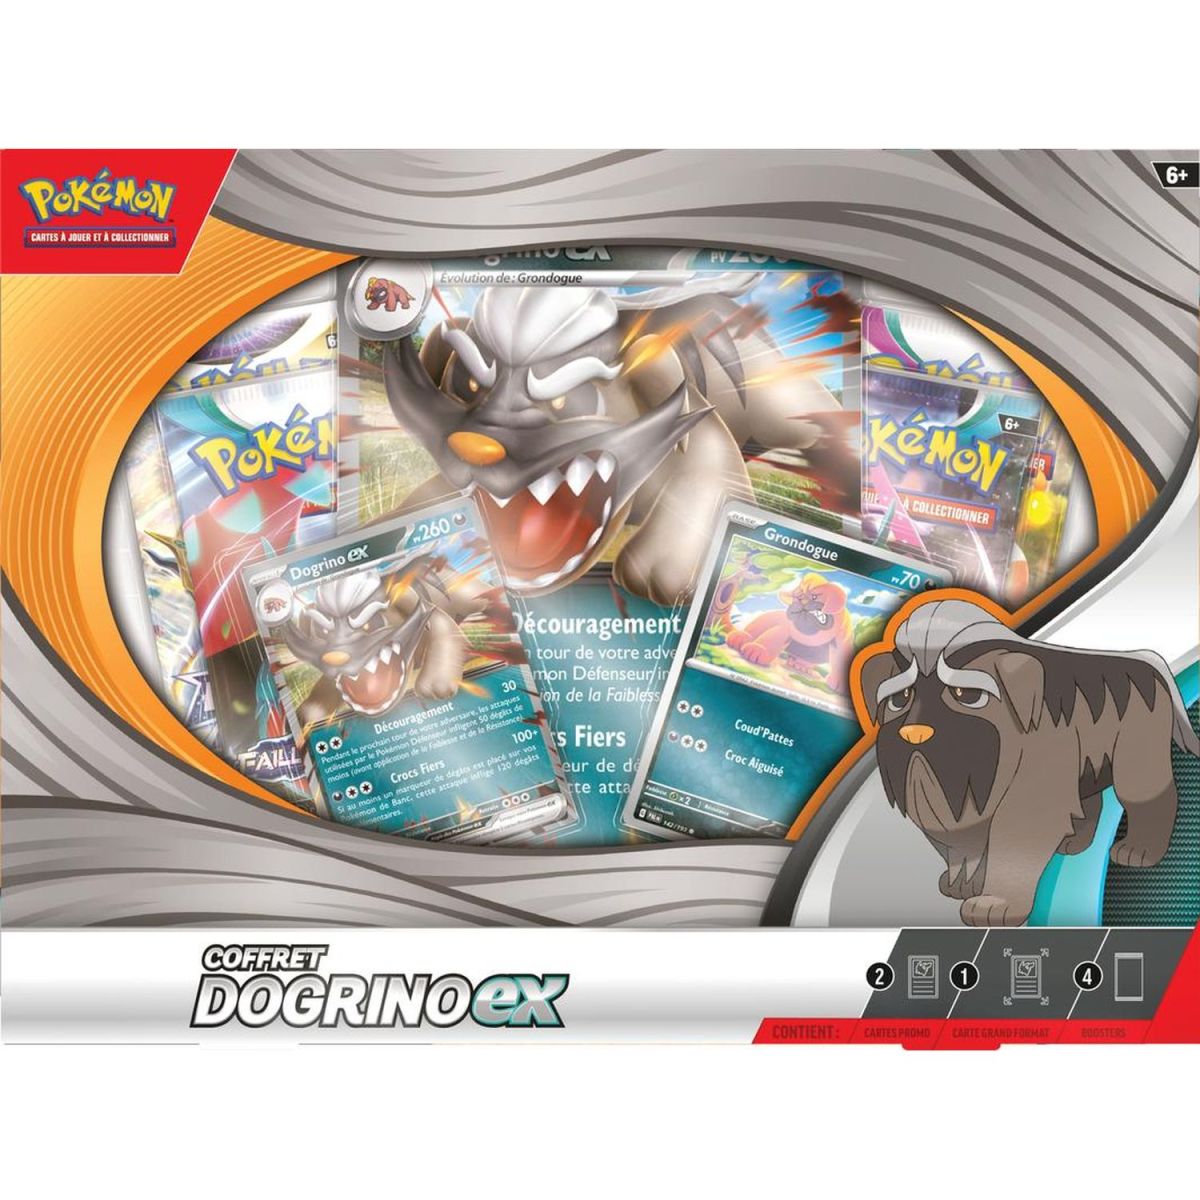 Pokémon - Box of 4 Boosters - Dogrino-EX - FR